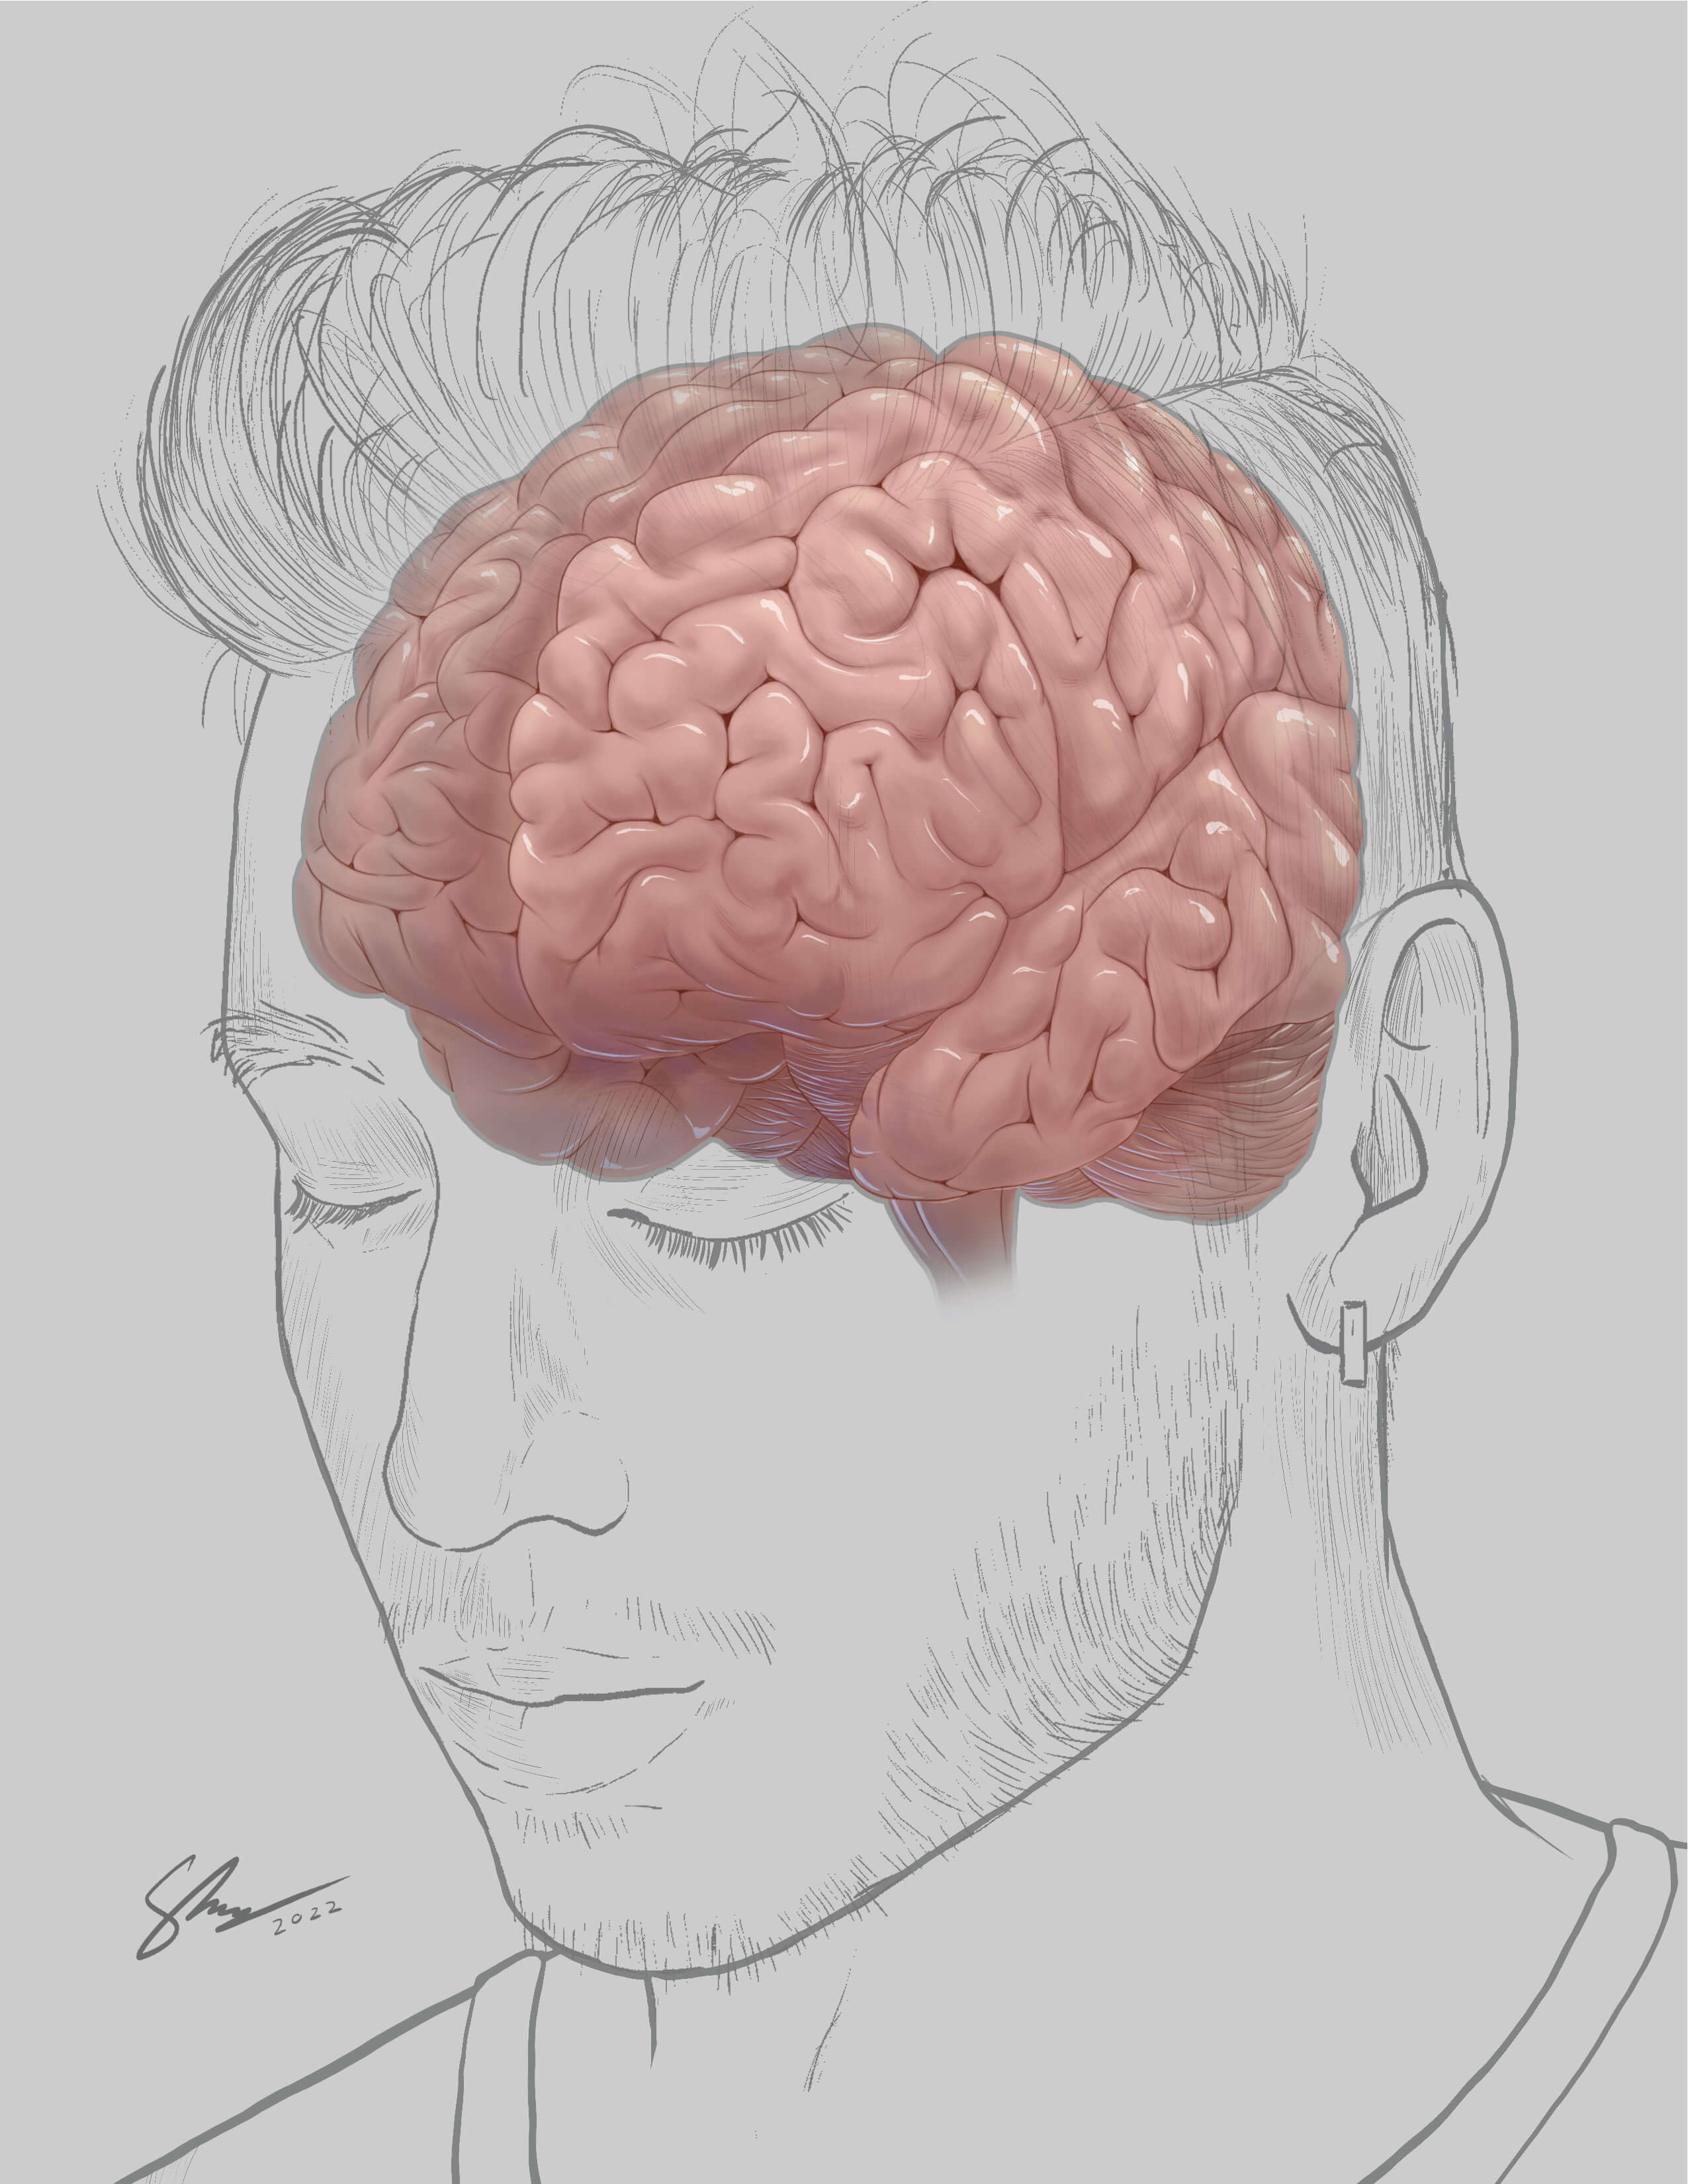 Final self-portrait with brain illustration including shading on brain and linework for head